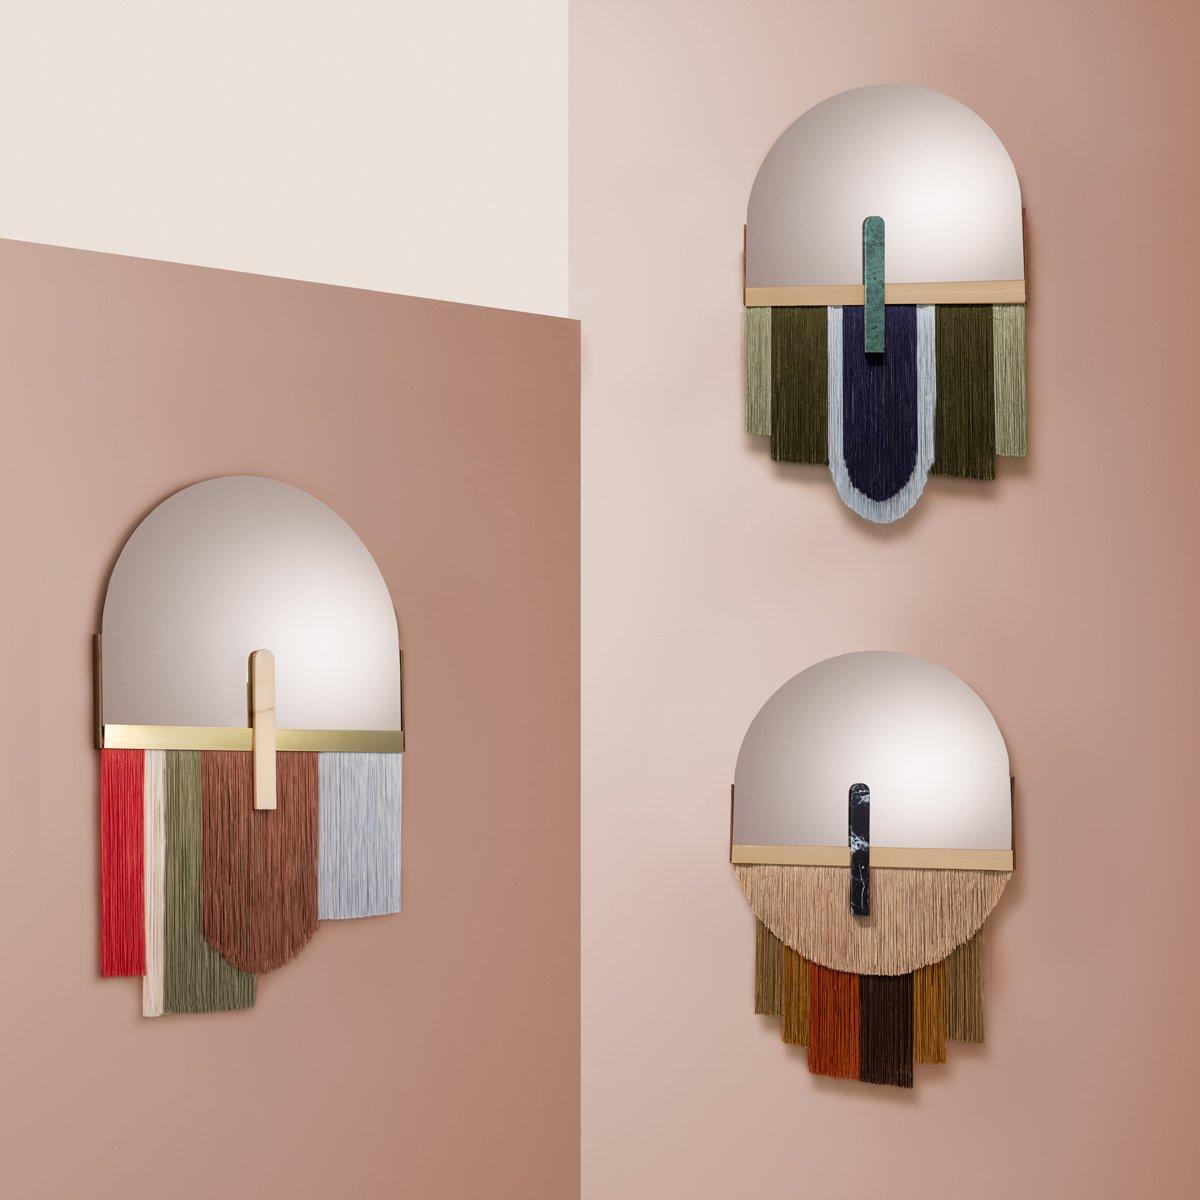 Ensemble of Three Colorful Wall Mirrors by Dooq For Sale 1